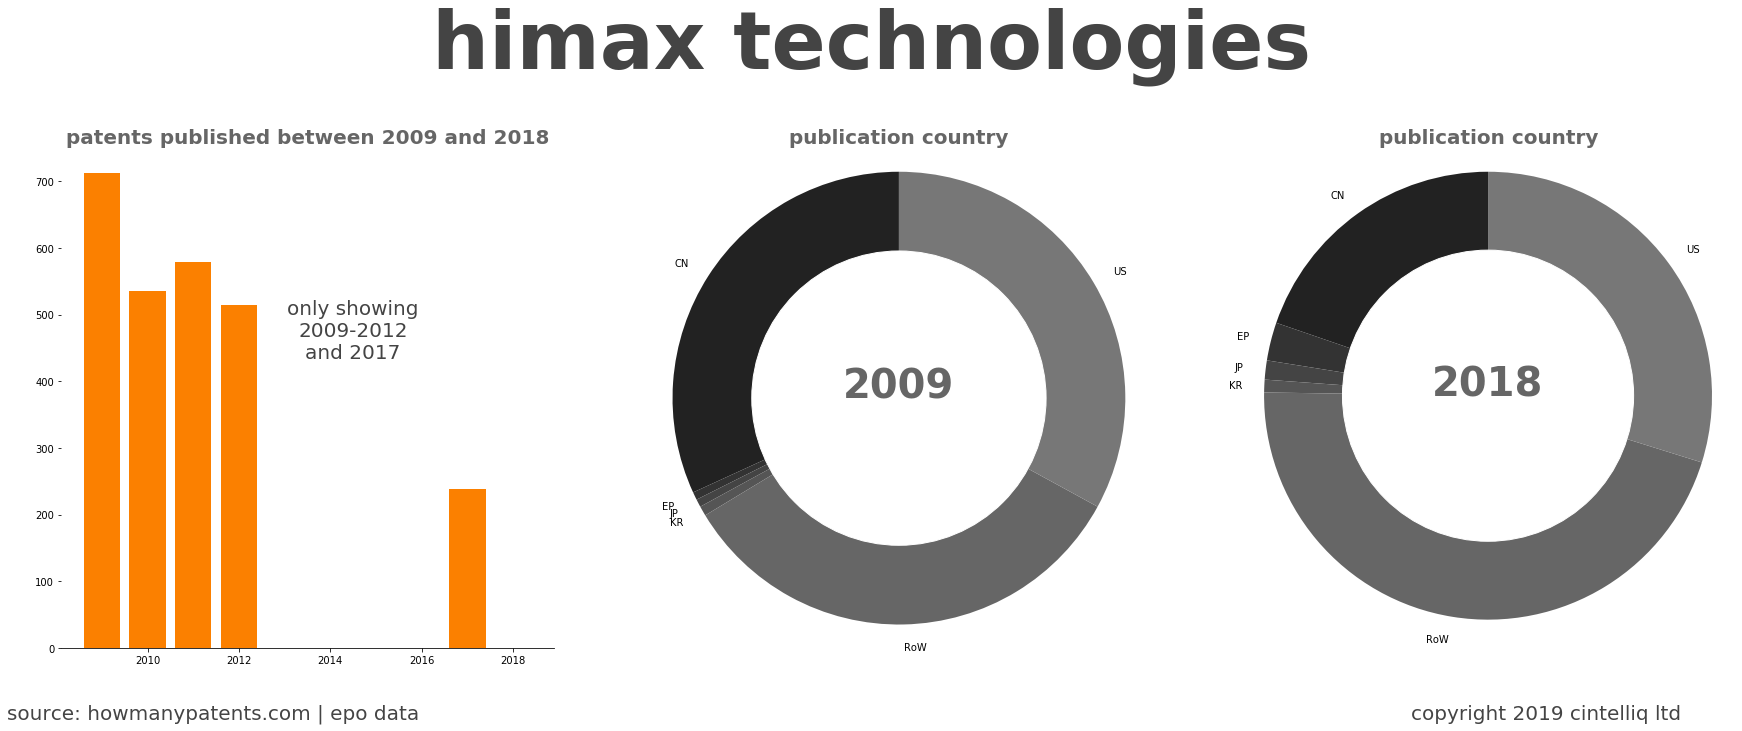 summary of patents for Himax Technologies